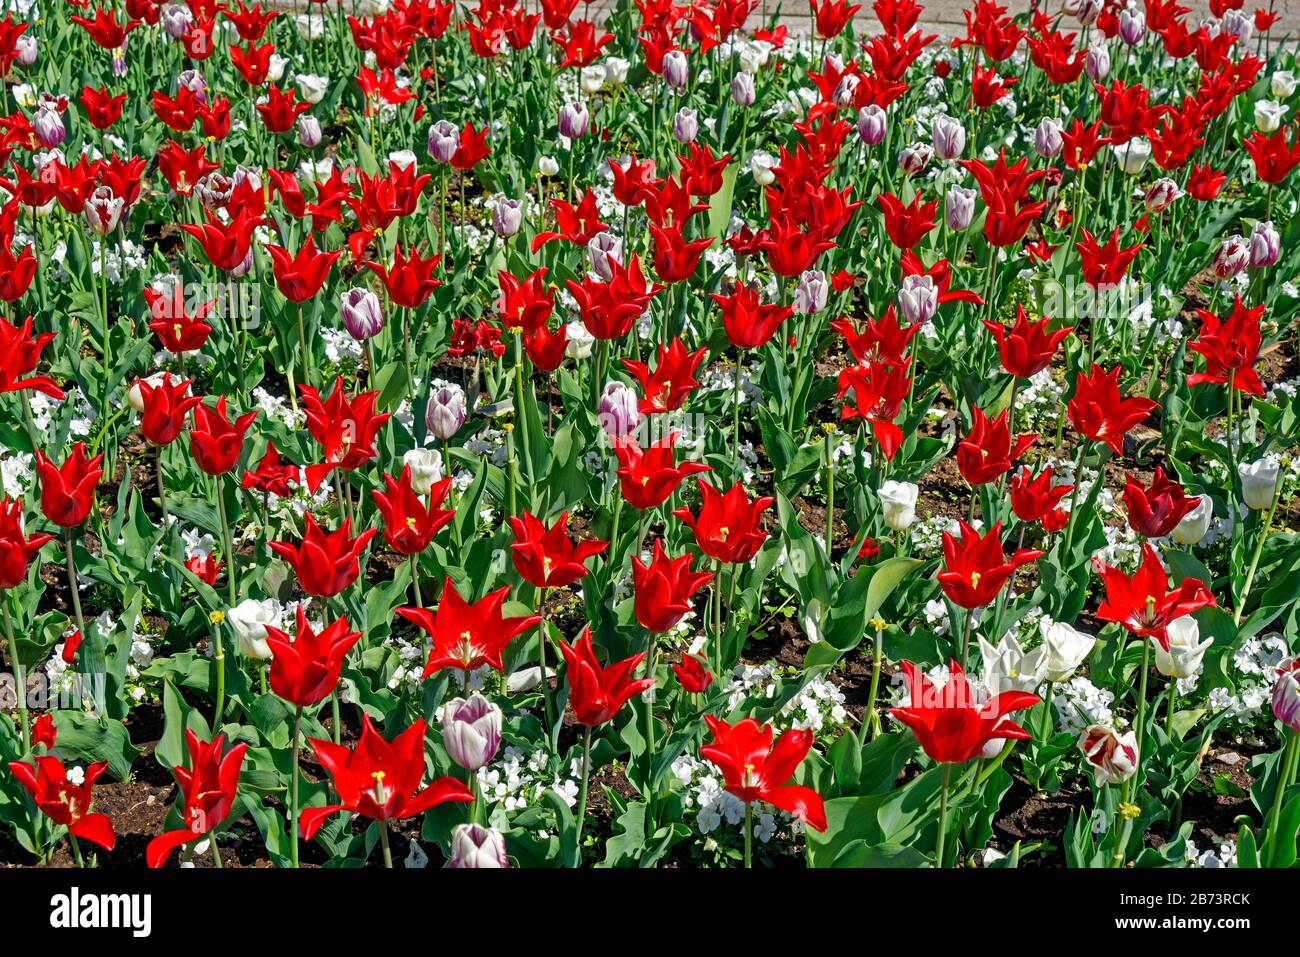 Germany, Rhineland-Palatinate, Speyer, cathedral place, SchUM town, place of the twin towns, bed of tulips, red, knows, detail, place of interest, tou Stock Photo